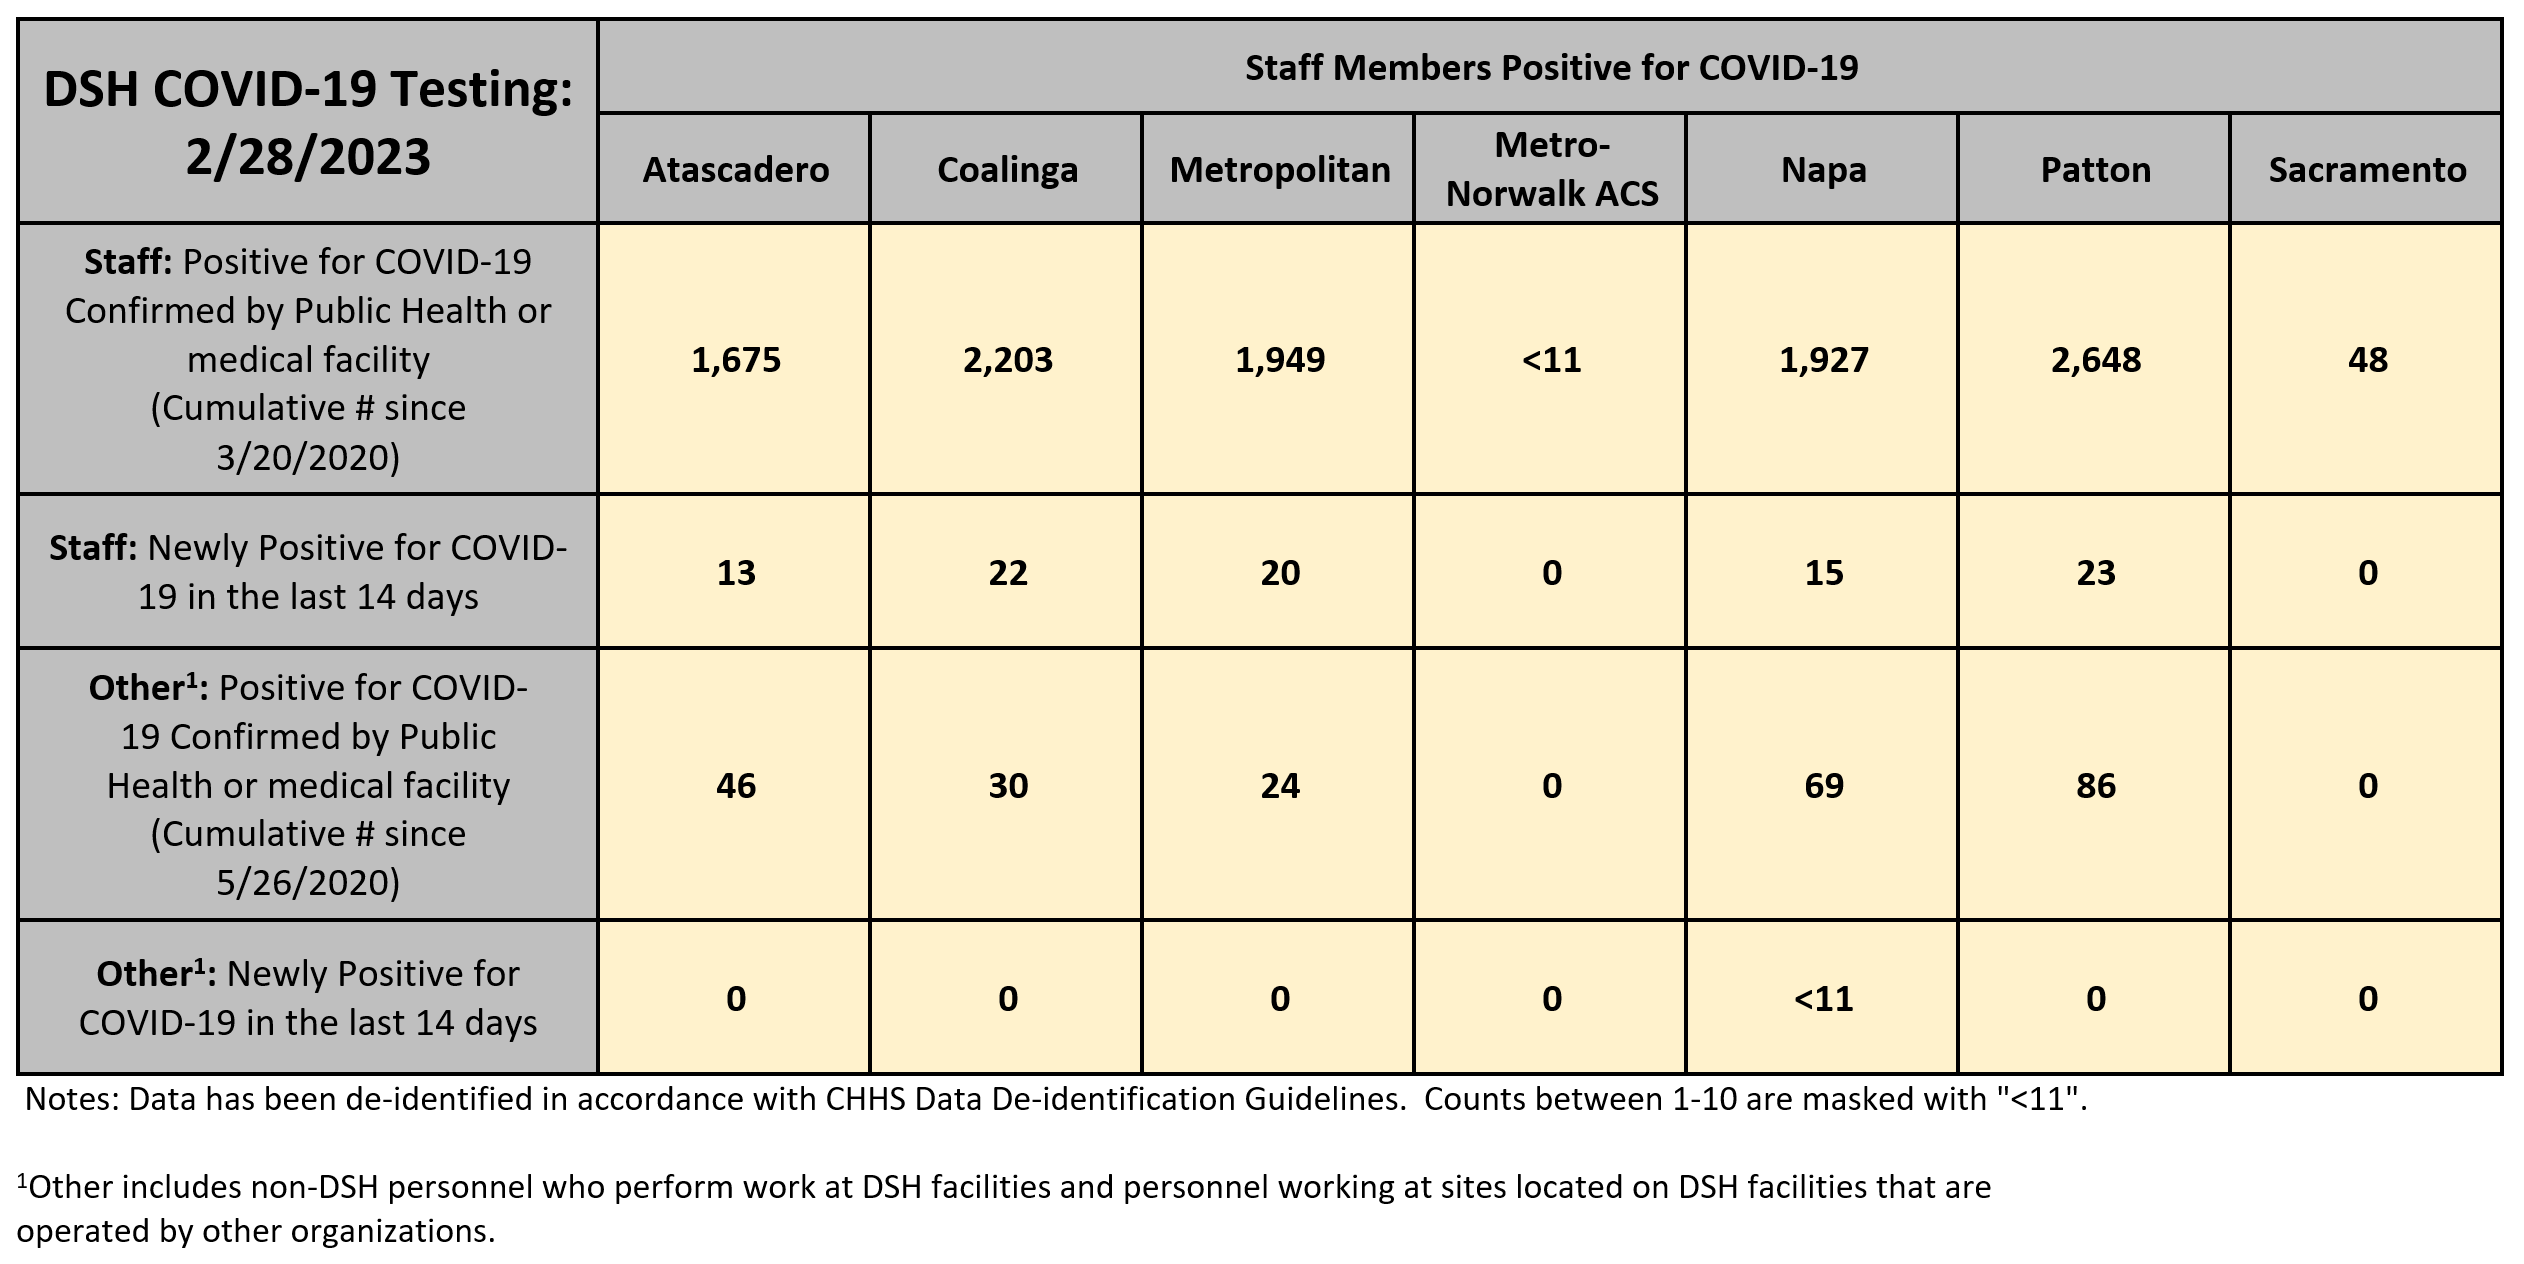 DSH COVID-19 Testing: As of 11/23/2022 – Staff Members Positive for COVID-19 - First Row: Staff: Positive for COVID-19 Confirmed by Public Health or medical facility (Cumulative Number since 3/20/2020): Atascadero: 1,445, Coalinga: 1,916, Metropolitan: 1,697, Metro-Norwalk ACS: Less than 11, Napa: 1,693, Patton: 2,228, Sacramento: 46 – Next Row: Staff: Newly Positive for COVID-19 in the last 14 days: Atascadero: 24, Coalinga: 40, Metropolitan: 61, Metro-Norwalk ACS: 0, Napa: 49, Patton: 124, Sacramento: 0 – Next Row: Other: Positive for COVID-19 Confirmed by Public Health or medical facility (Cumulative Number since 5/26/2020)(Other includes non-DSH personnel who perform work at DSH facilities and personnel working at sites located on DSH facilities that are operated by other organizations). Atascadero: 41, Coalinga: 18, Metropolitan: 20, Metro-Norwalk ACS: 0, Napa: 62, Patton: 83, Sacramento: 0 – Next Row: Other: Newly Positive for COVID-19 in the last 14 days: Atascadero: Less than 11, Coalinga: 0, Metropolitan: Less than 11, Metro-Norwalk ACS: 0, Napa: Less than 11, Patton: Less than 11, Sacramento: 0